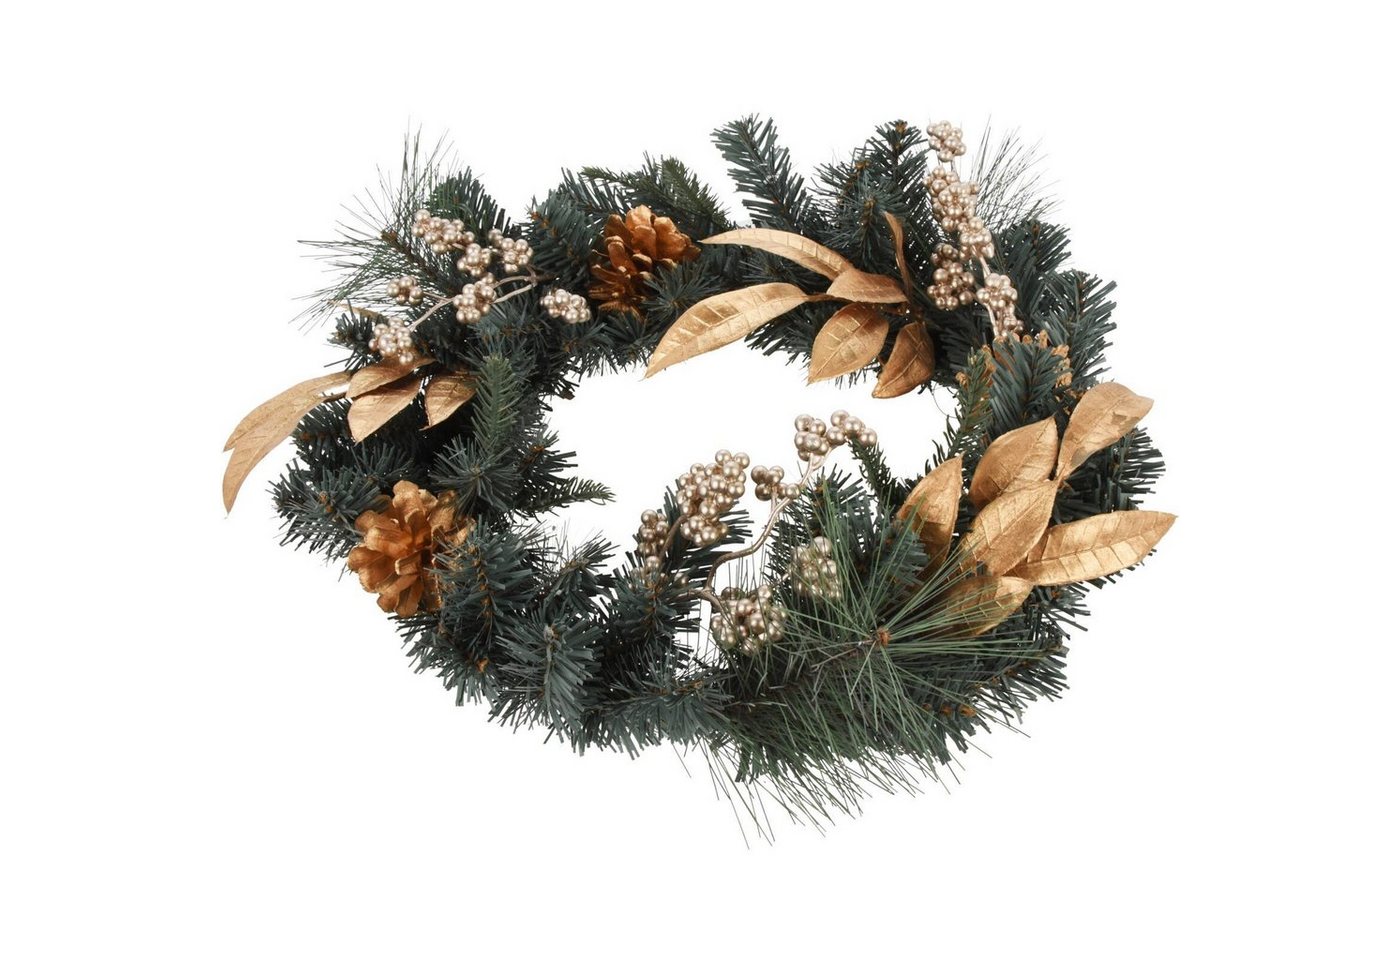 Home & styling collection Adventskranz Weihnachtskranz von Home & styling collection